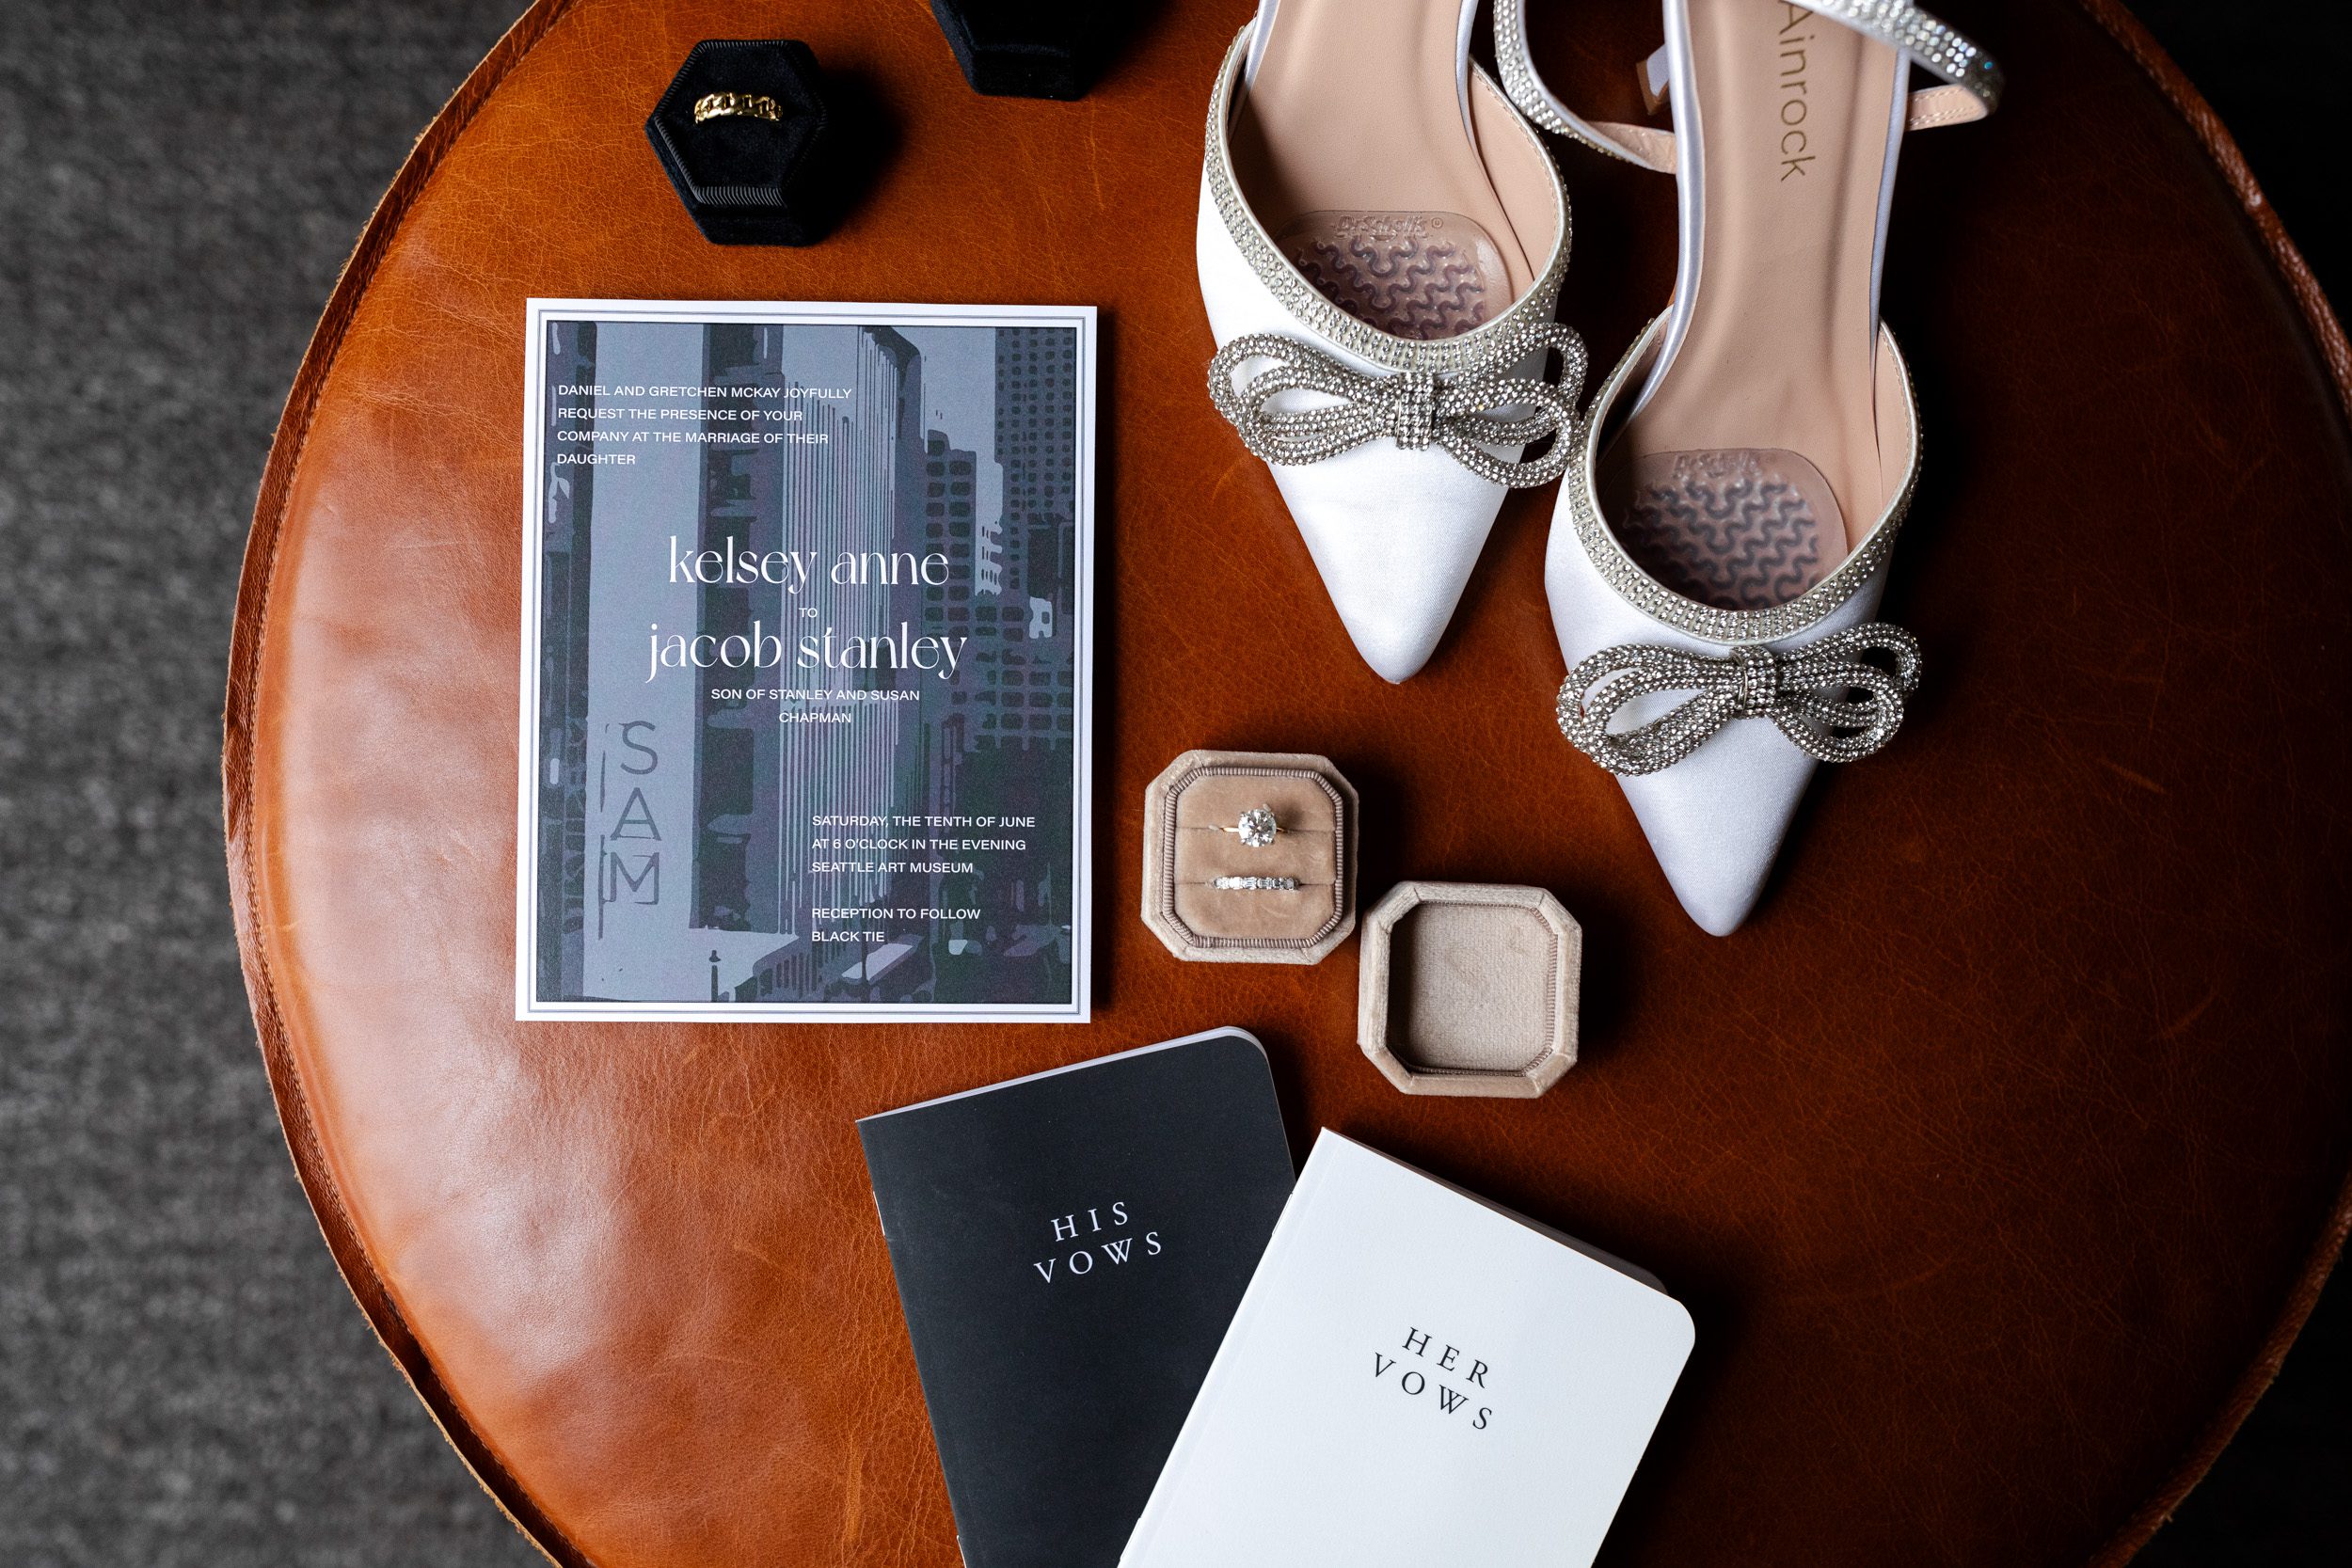 Detail photo of the bride's shoes, rings, invitation and vow book during getting ready at The Alexis Hotel.